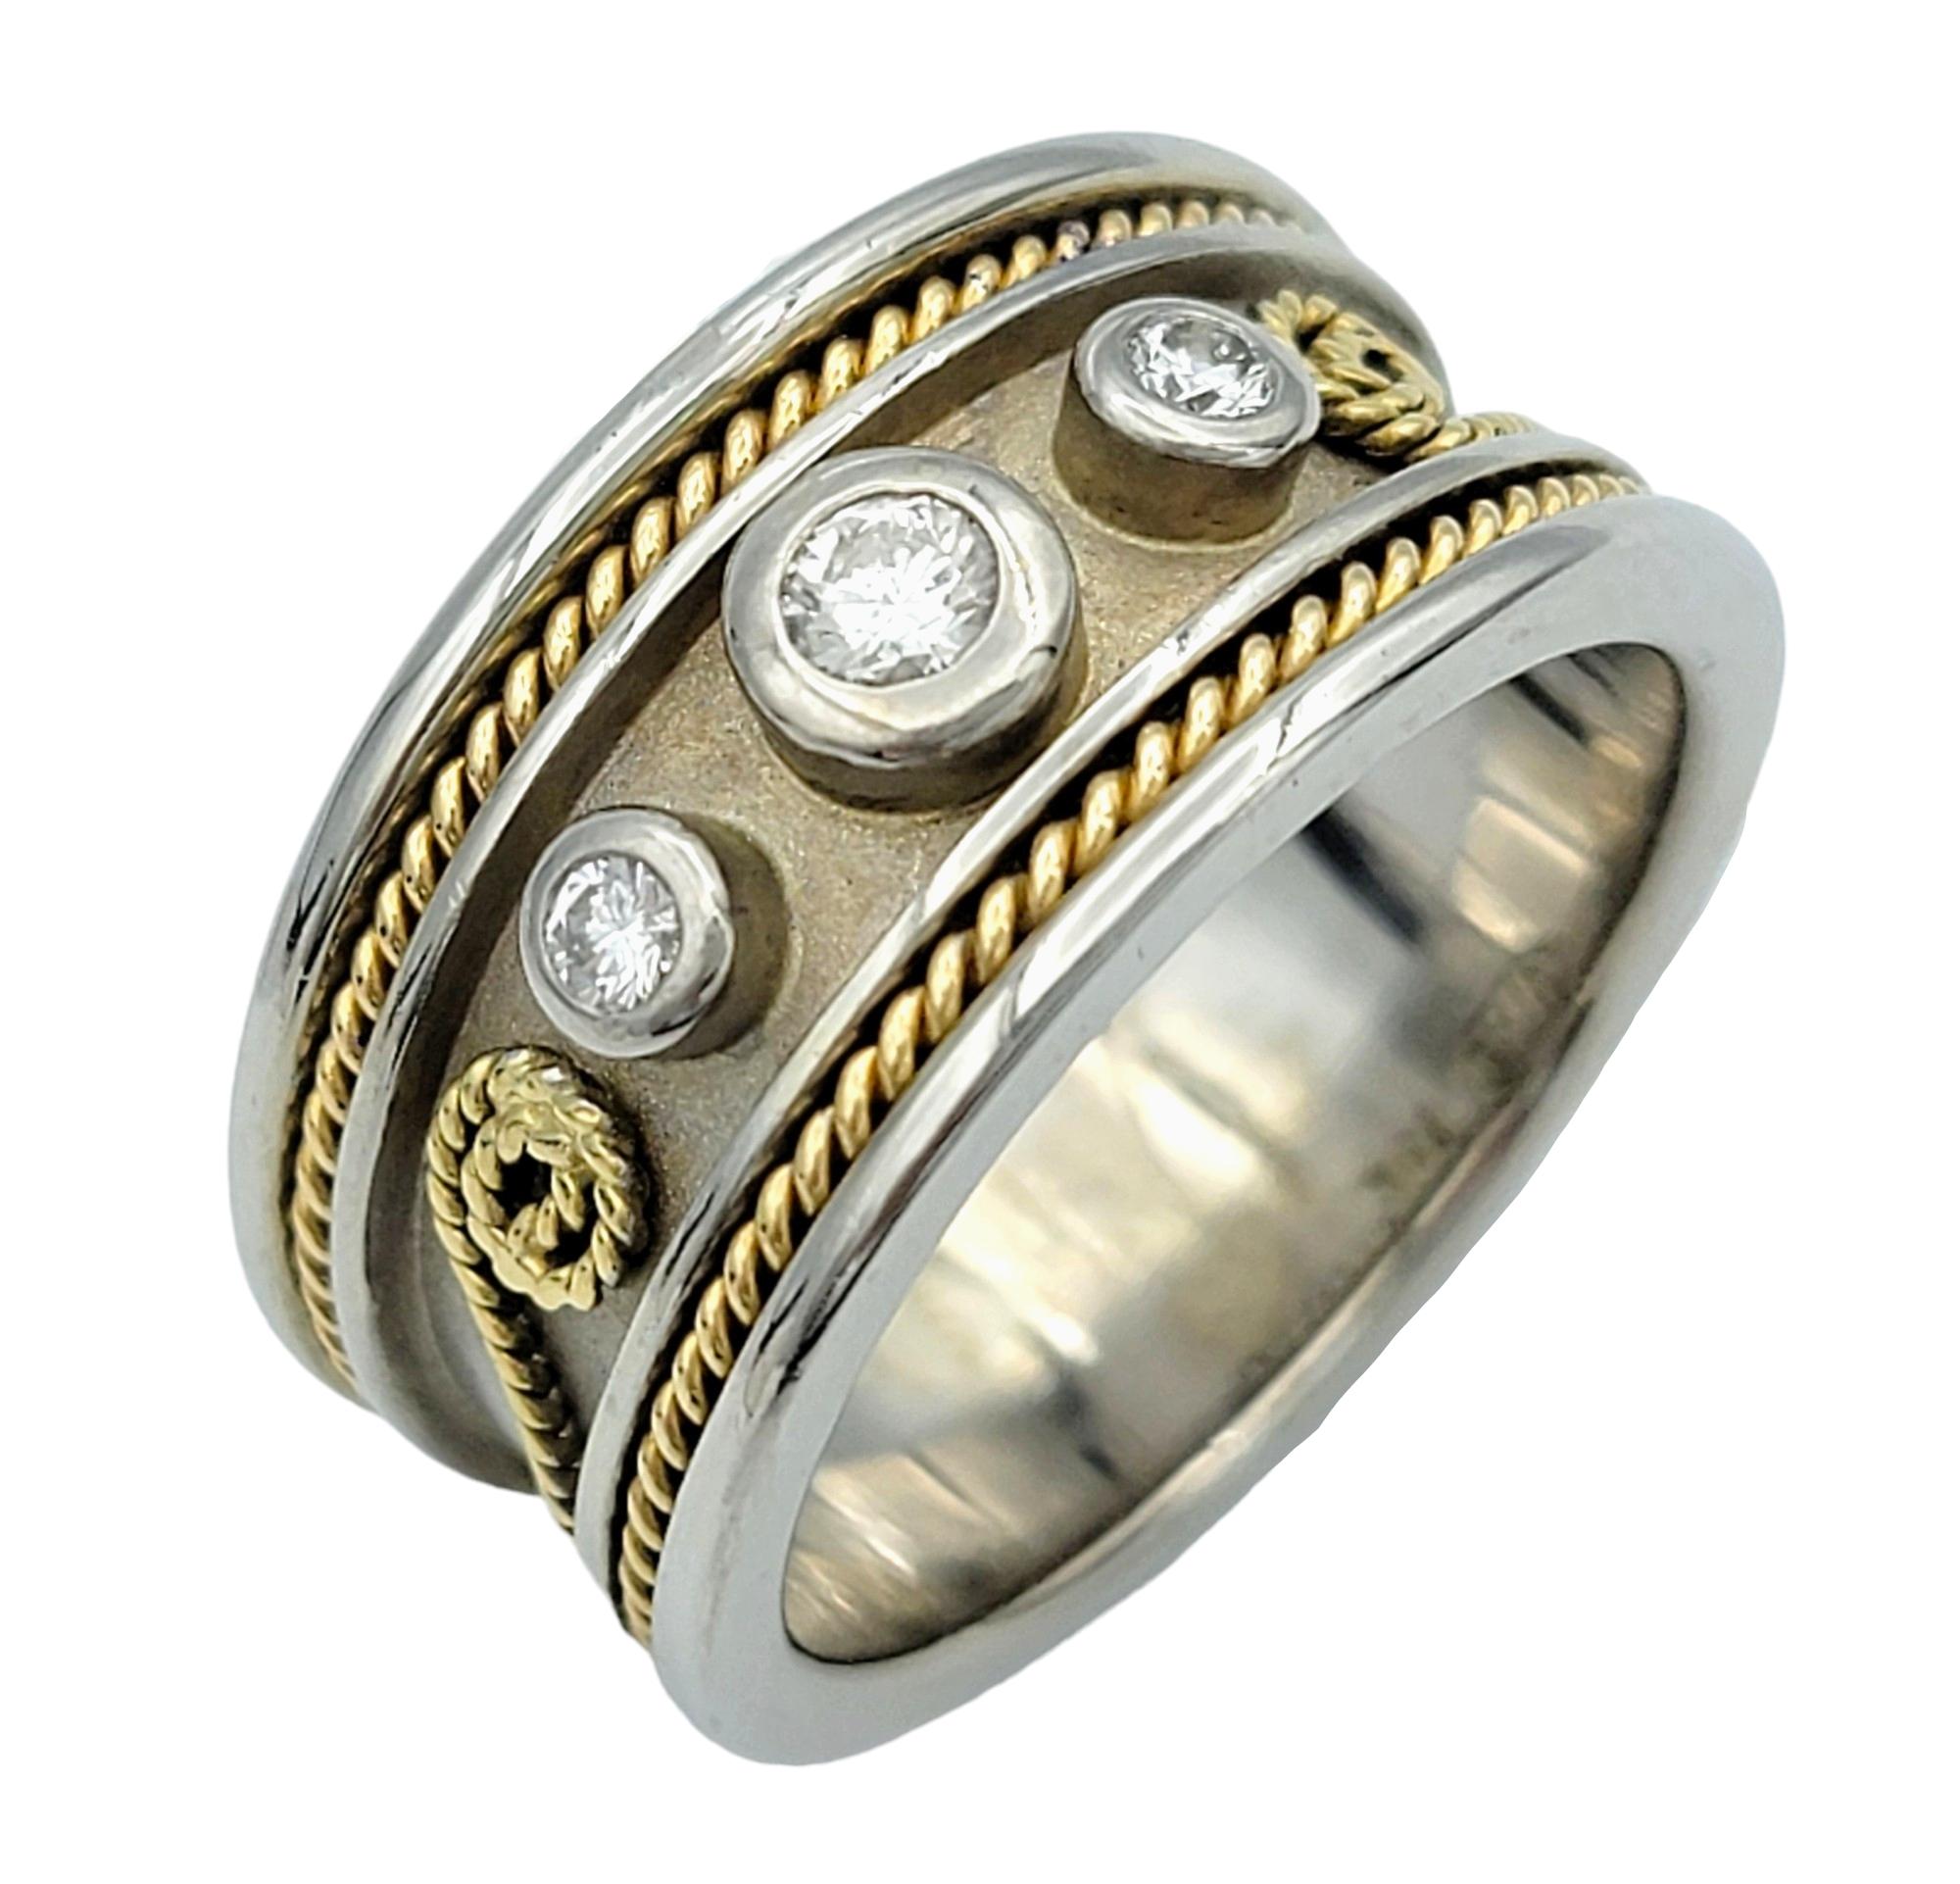 Ring Size: 9.5

This exquisite diamond band ring showcases a beautiful scroll-like design, meticulously crafted in 18 karat yellow and white gold. The scroll motif adds an elegant and ornate touch to the ring, giving it a timeless and sophisticated